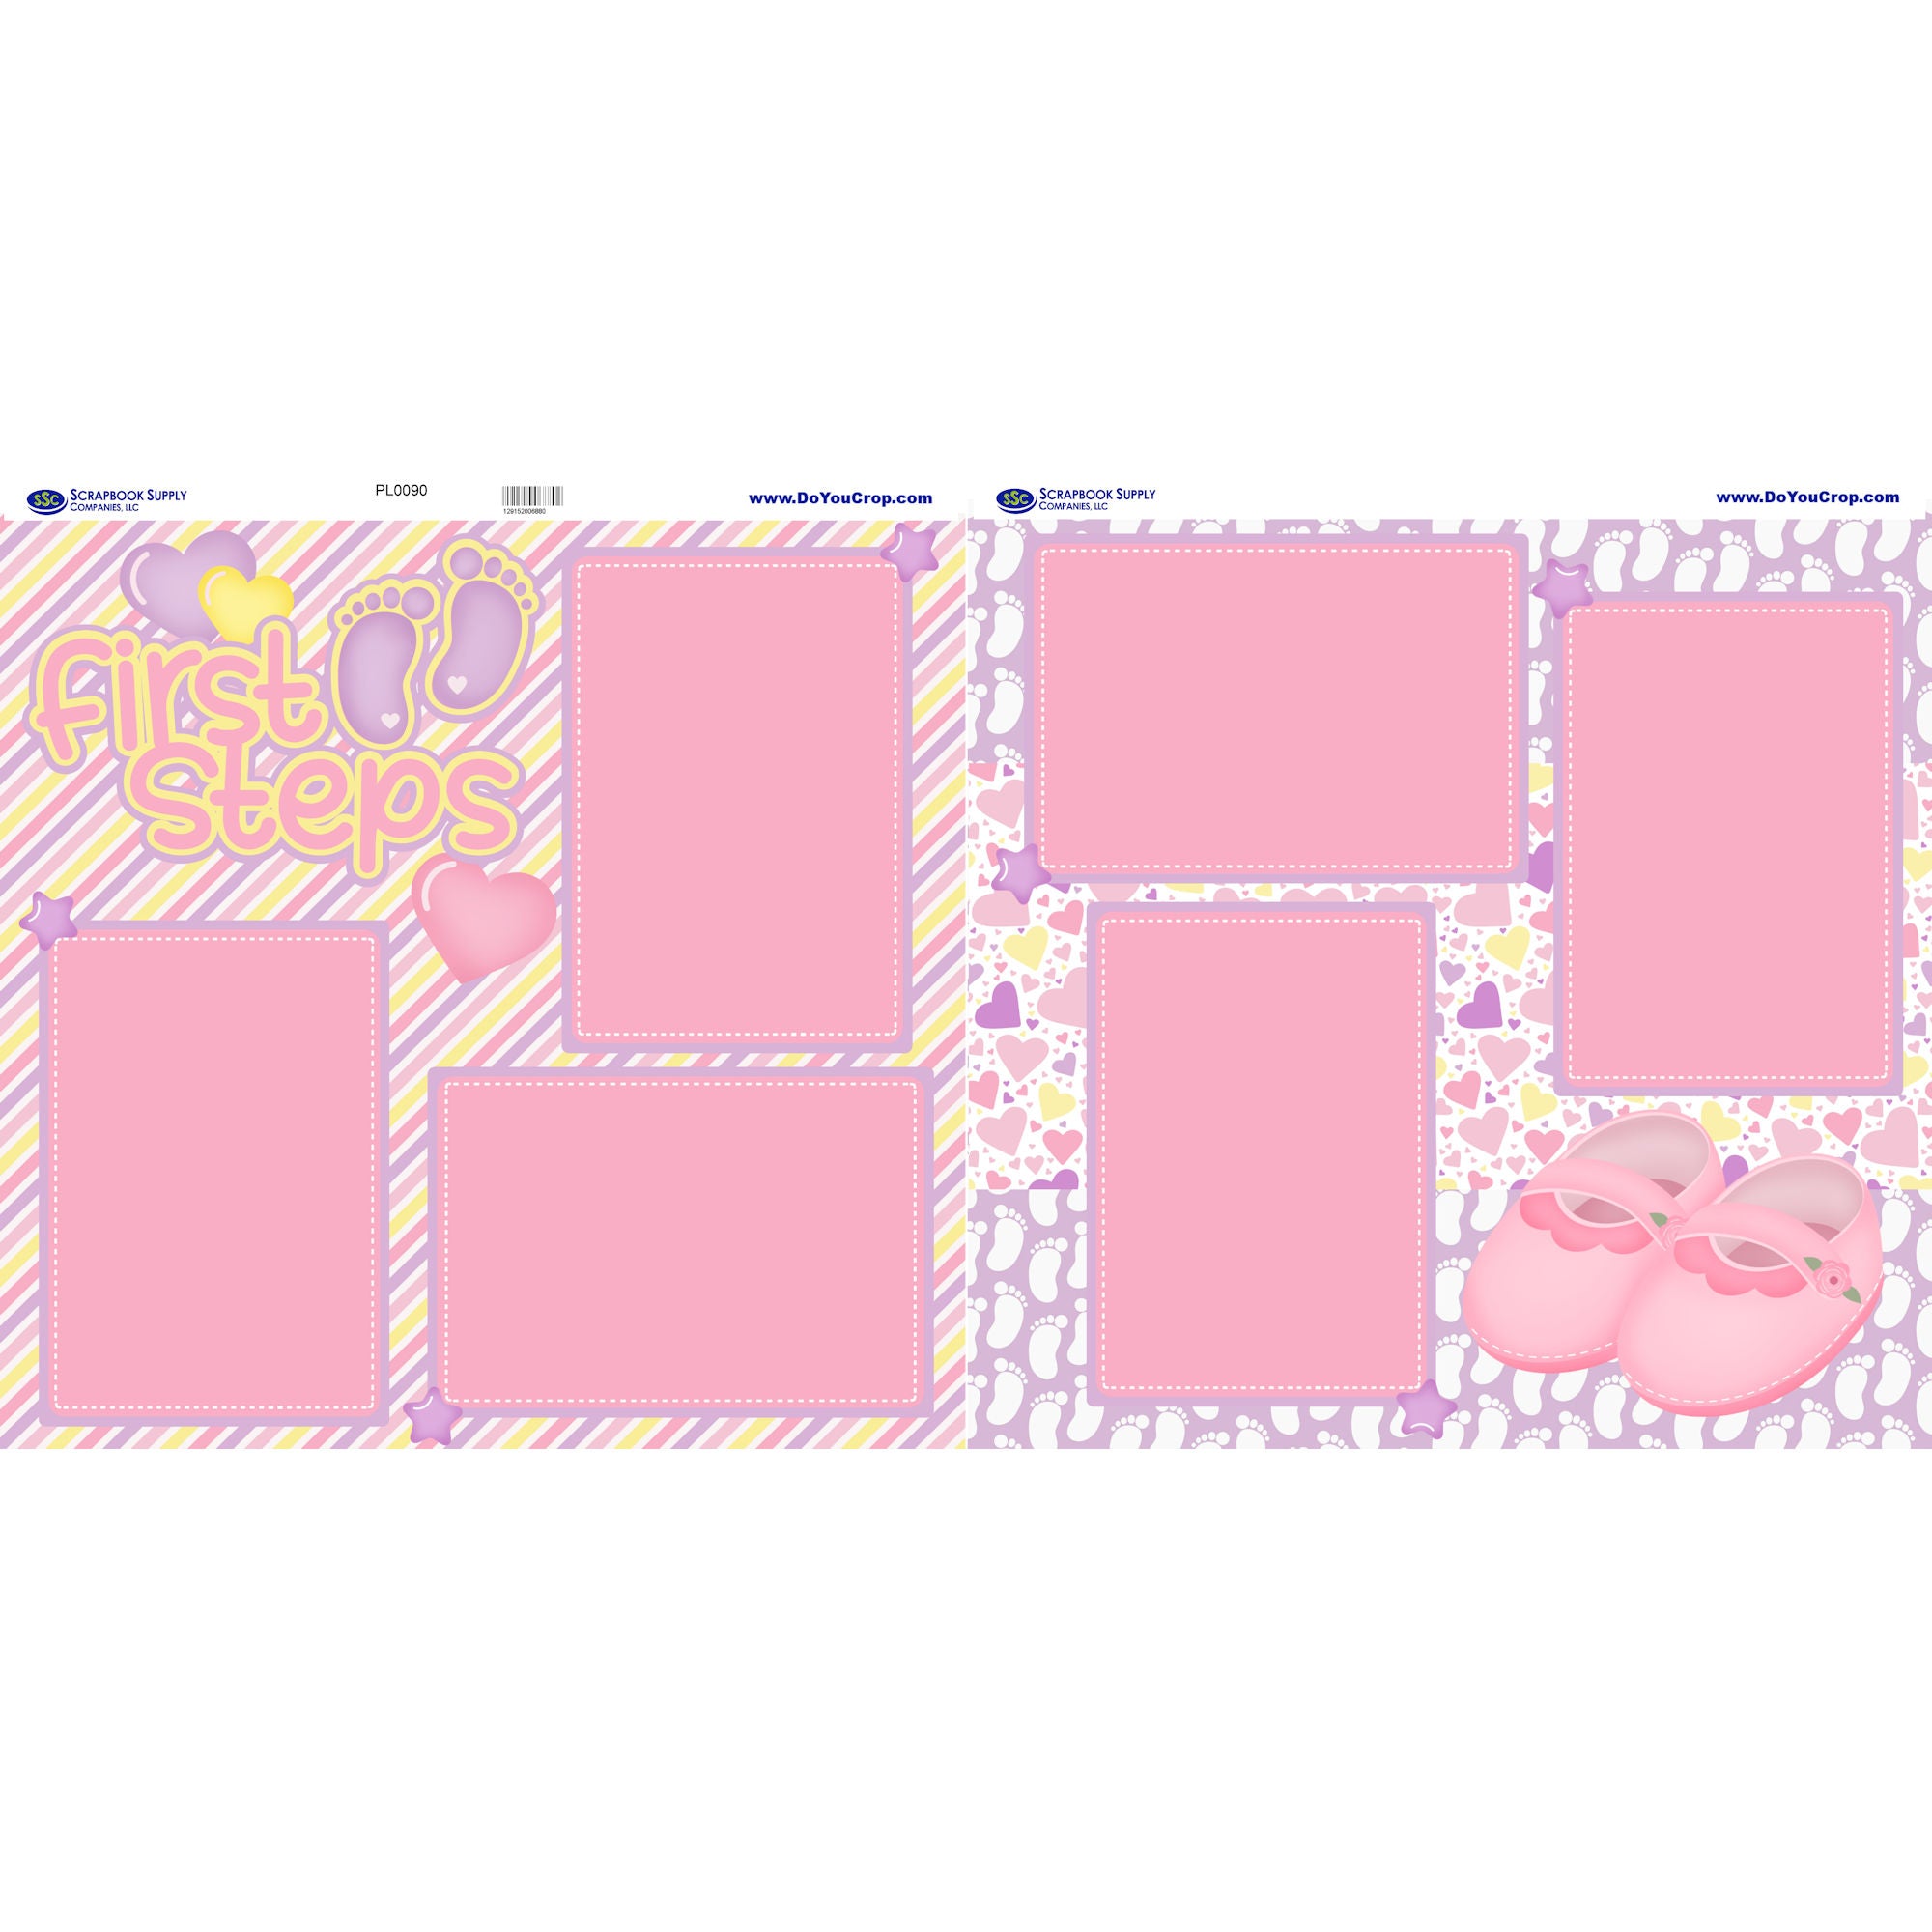 Baby's First Steps (2) - 12 x 12 Printed Scrapbook Pages by SSC Designs